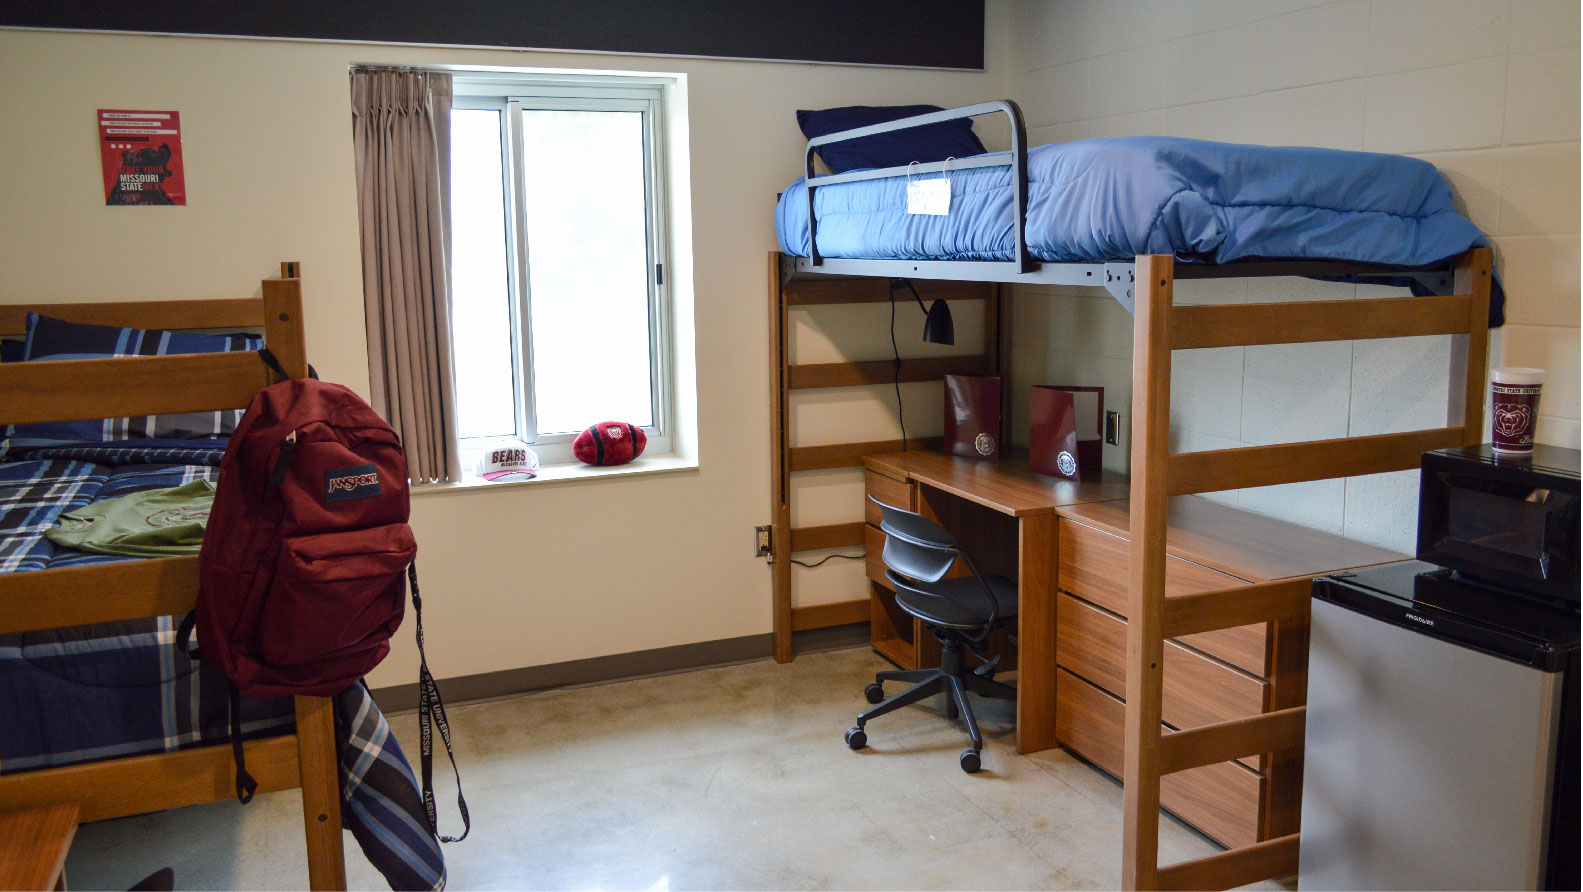 Woods Bedroom with 2 lofted beds desk and chair 3 drawer chest under bed mini fridge microwave